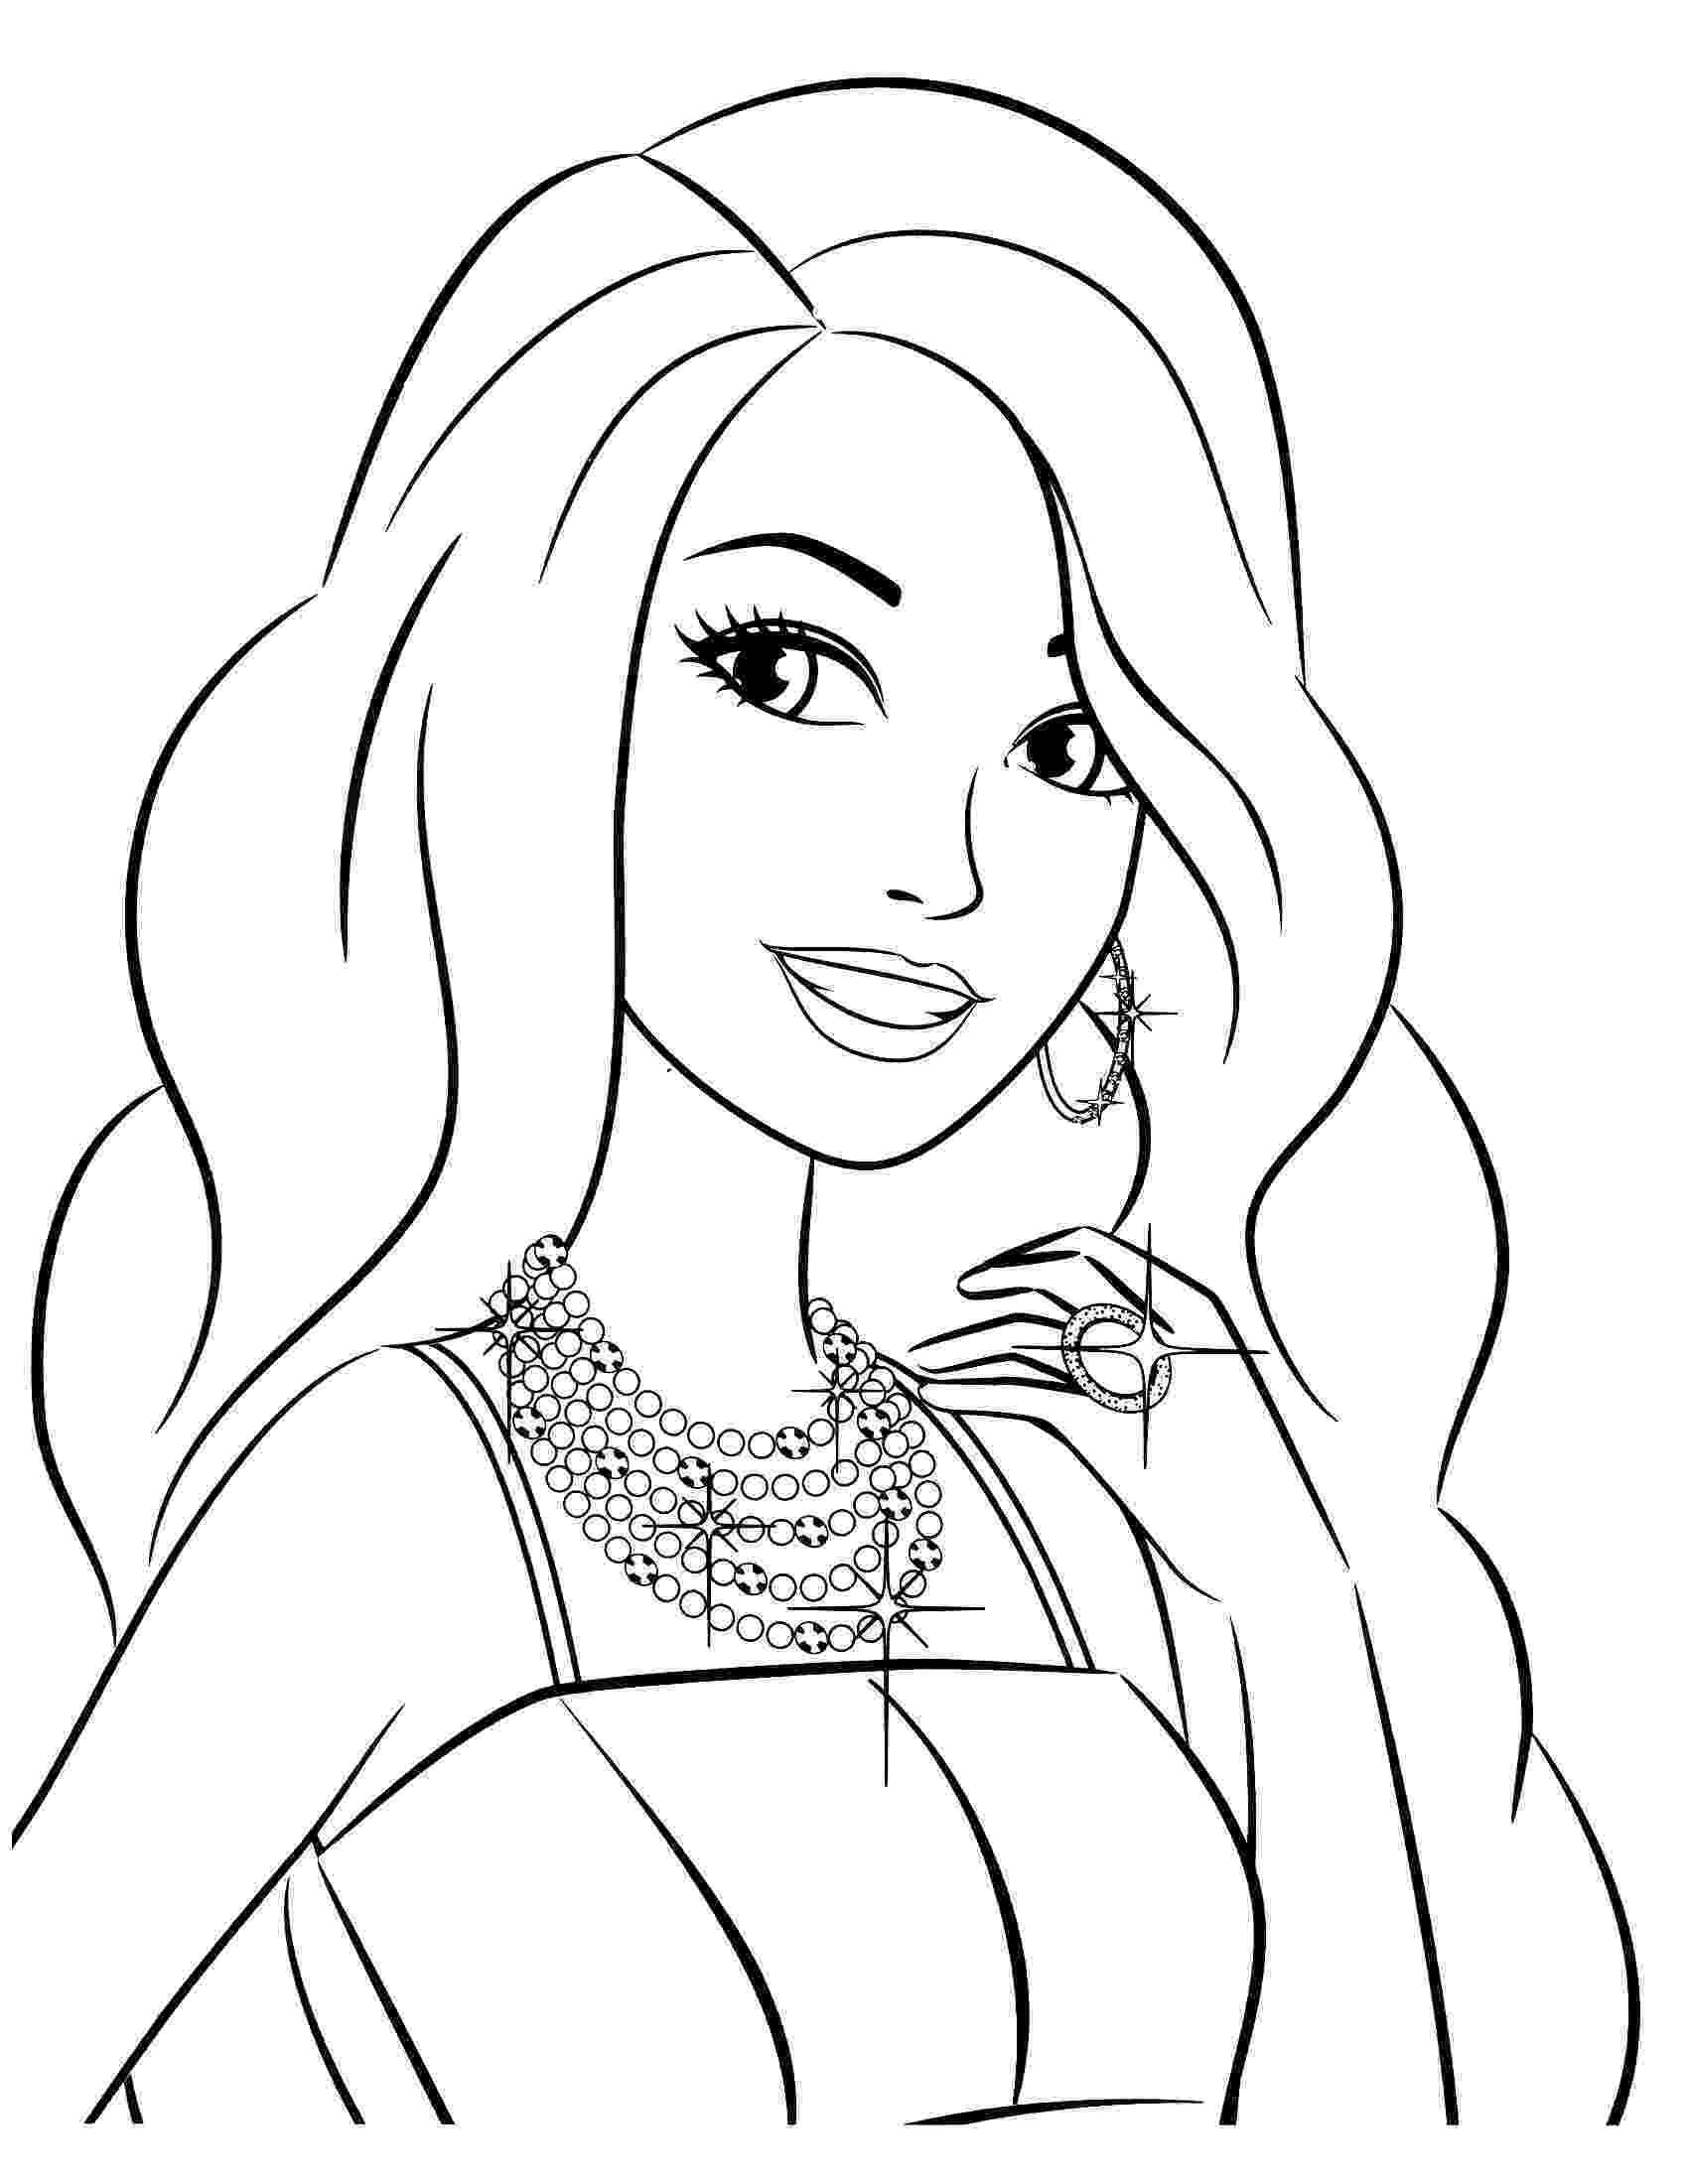 barbie free coloring pages coloring pages barbie free printable coloring pages free barbie pages coloring 1 1